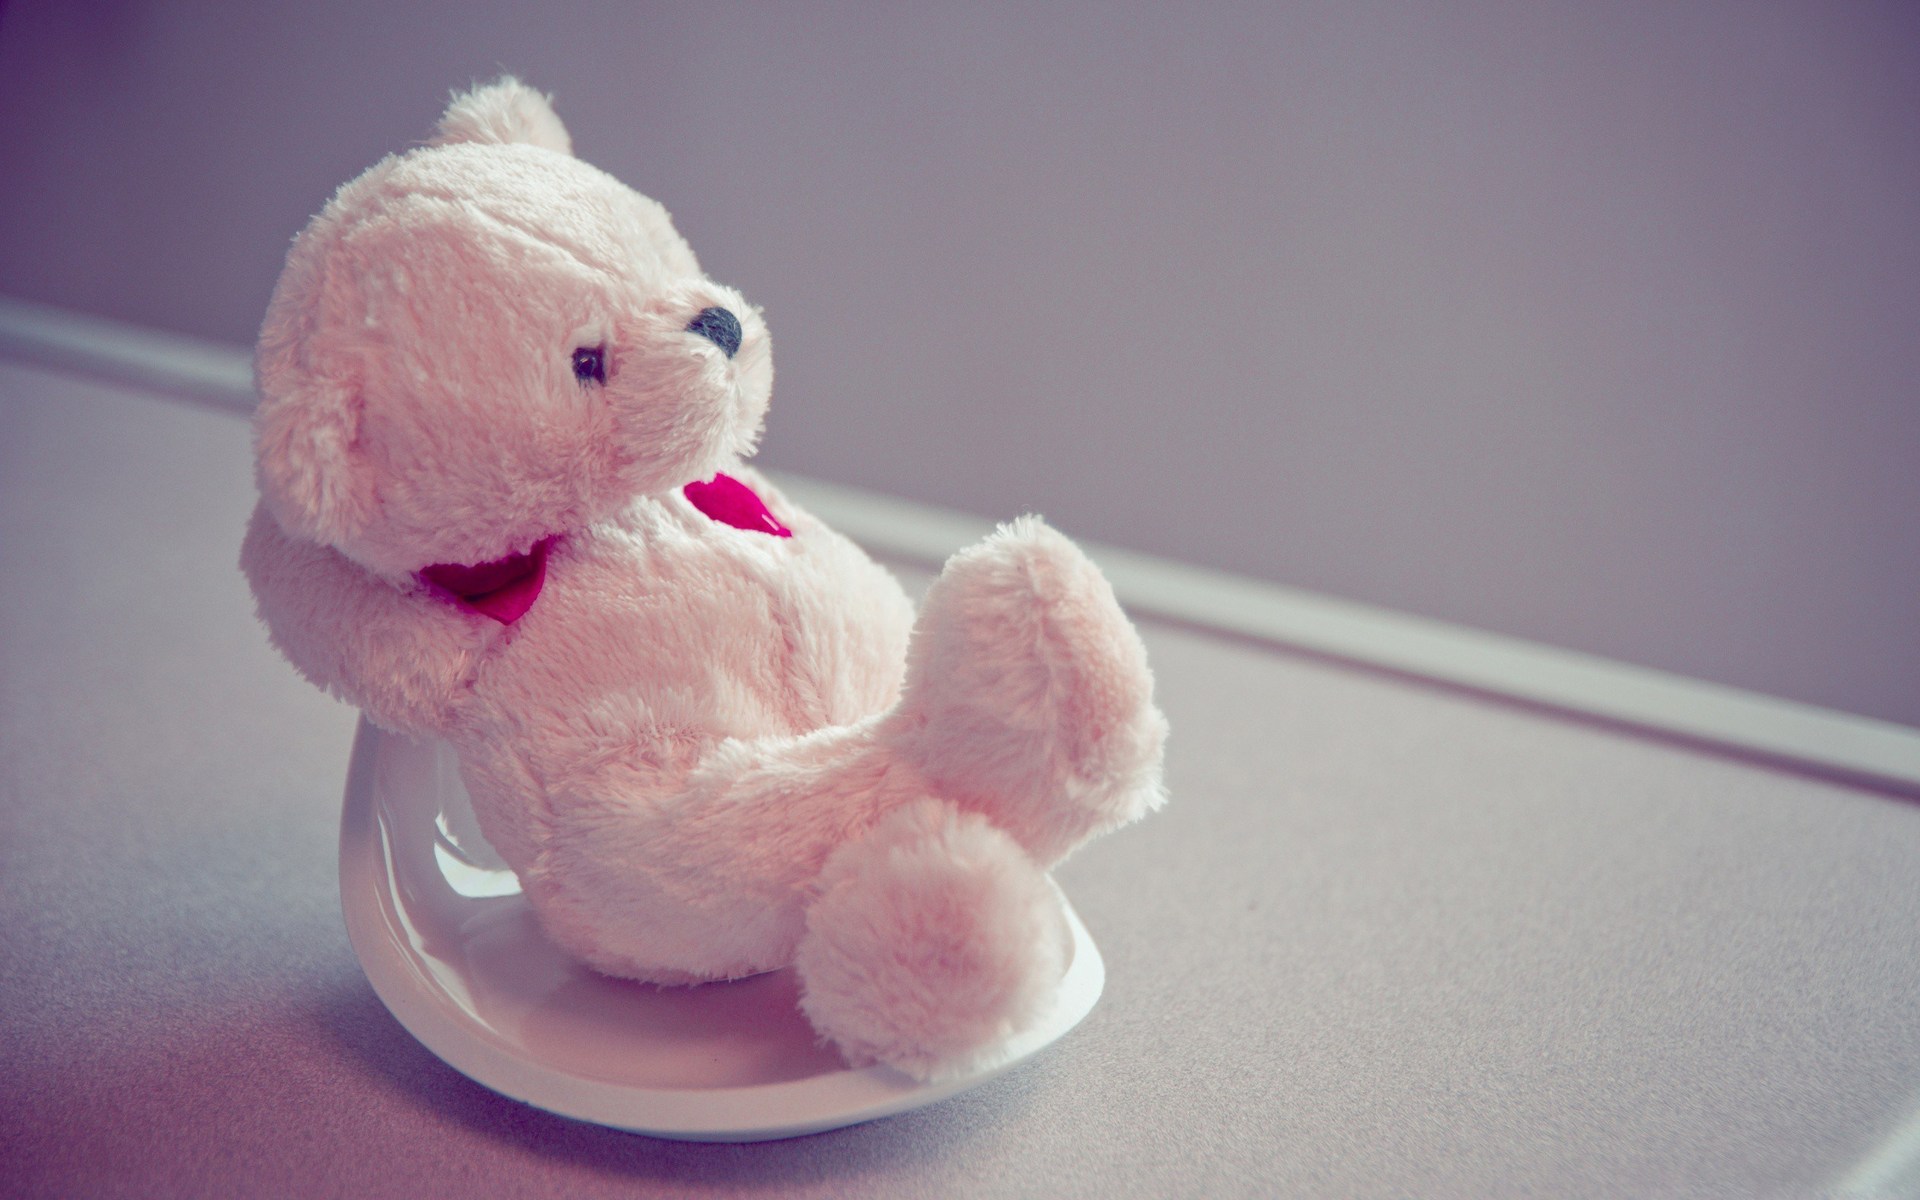 Wallpaper Cute Teddy Bears Is A Great For Your